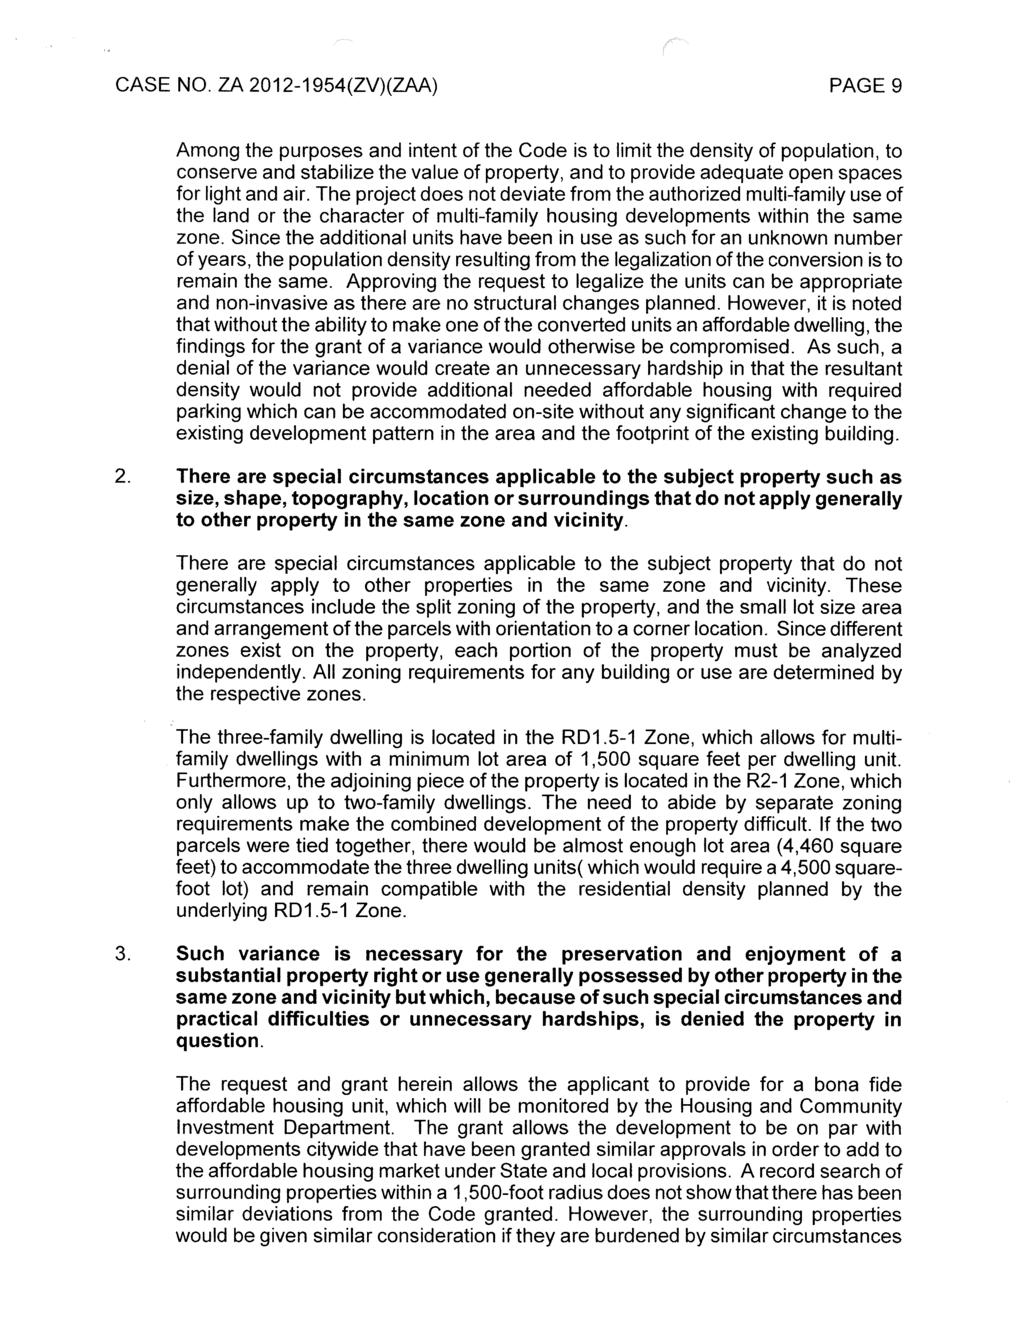 PAGE9 Among the purposes and intent of the Code is to limit the density of population, to conserve and stabilize the value of property, and to provide adequate open spaces for light and air.